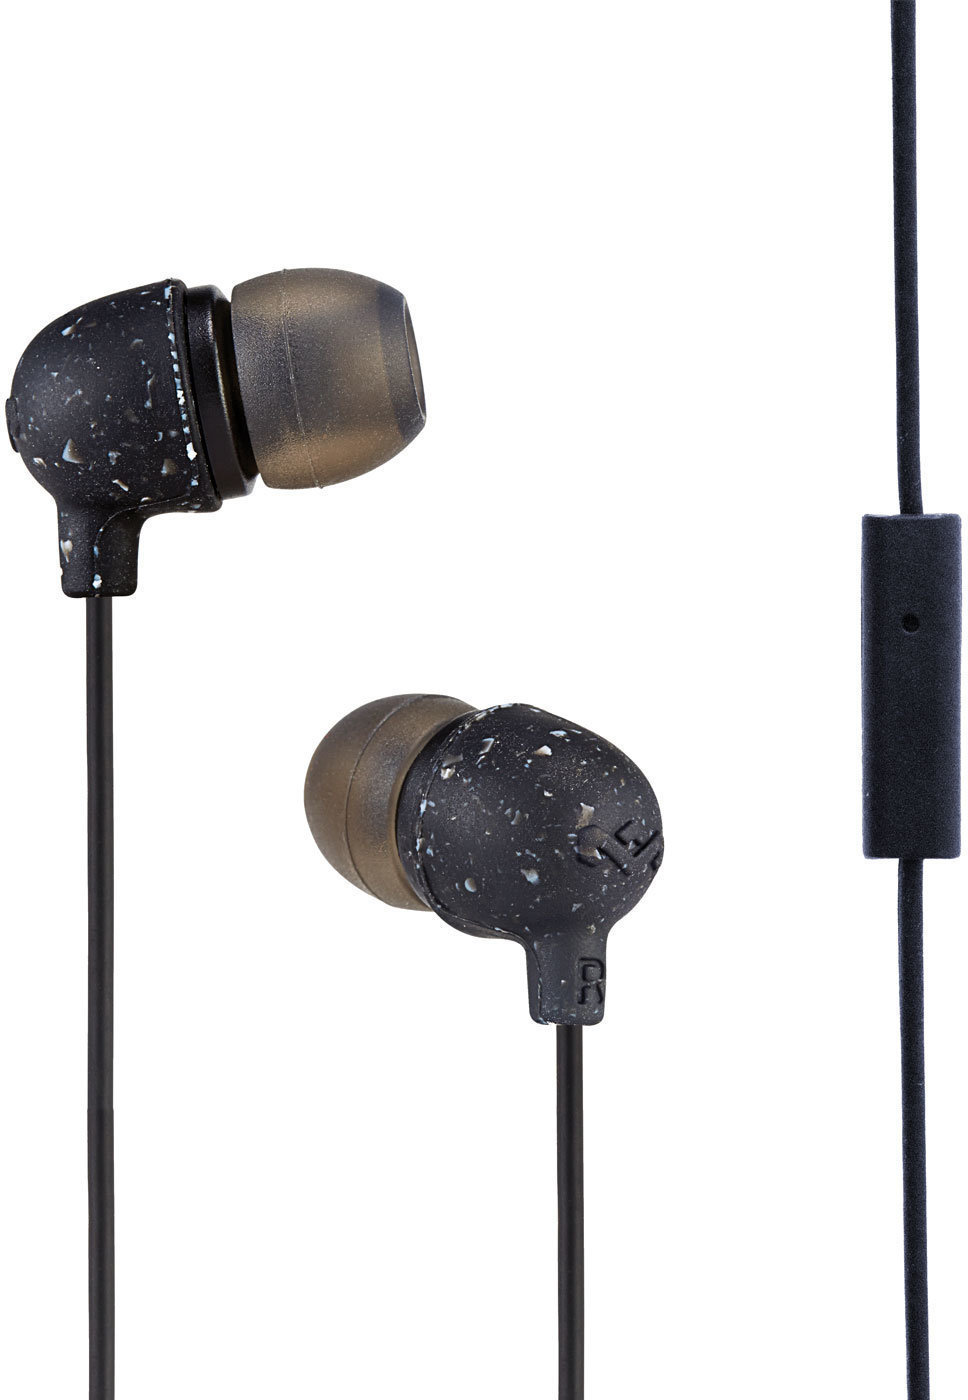 Ecouteurs intra-auriculaires House of Marley Little Bird Noir